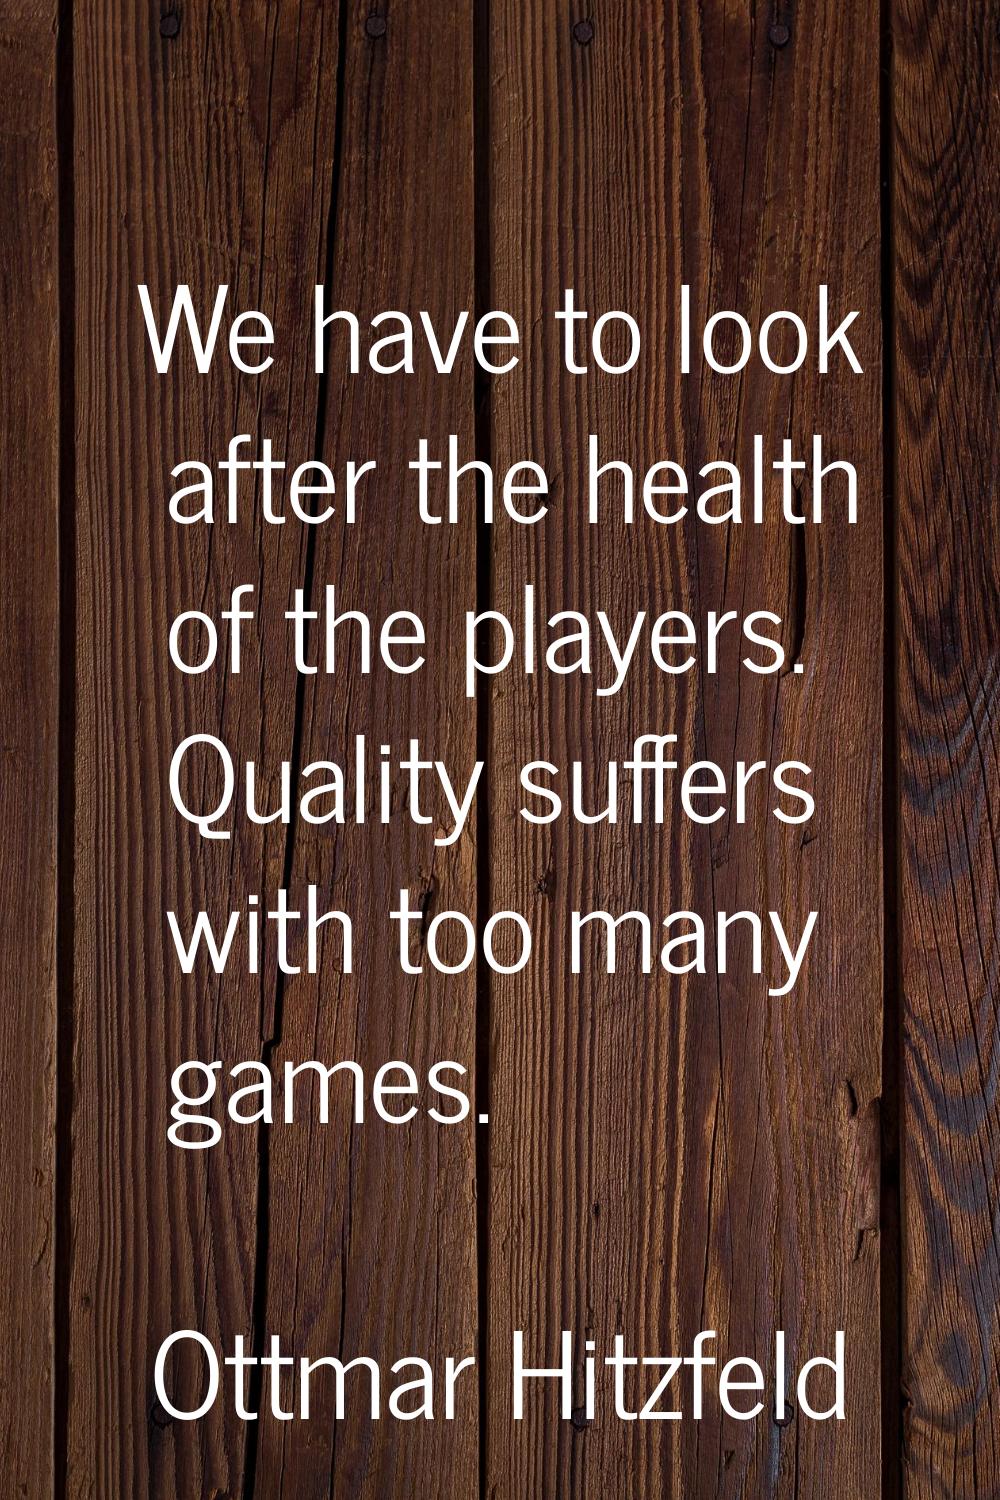 We have to look after the health of the players. Quality suffers with too many games.